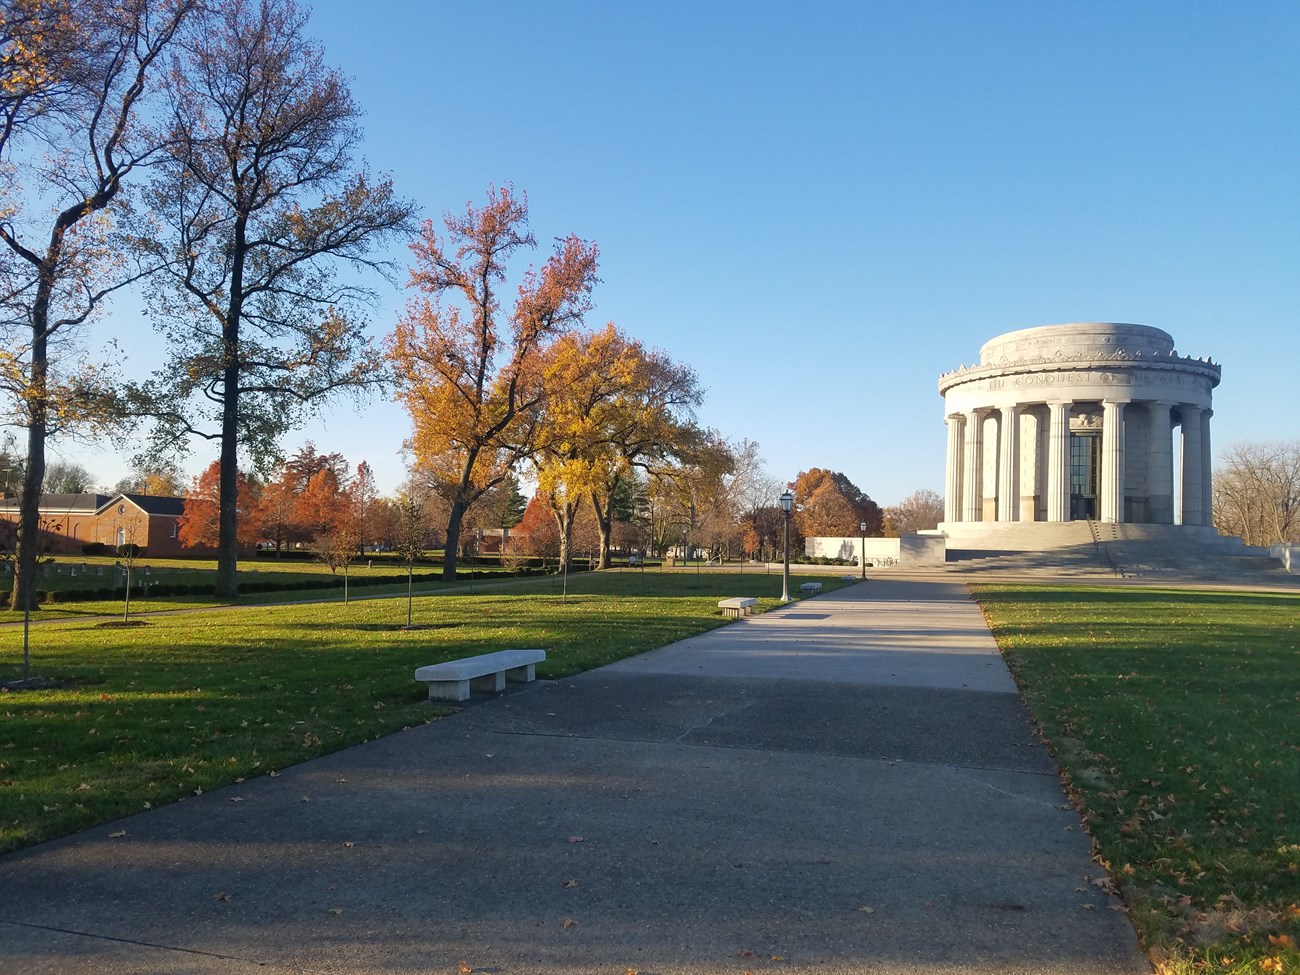 This is a picture of the George Rogers Clark Memorial Grounds